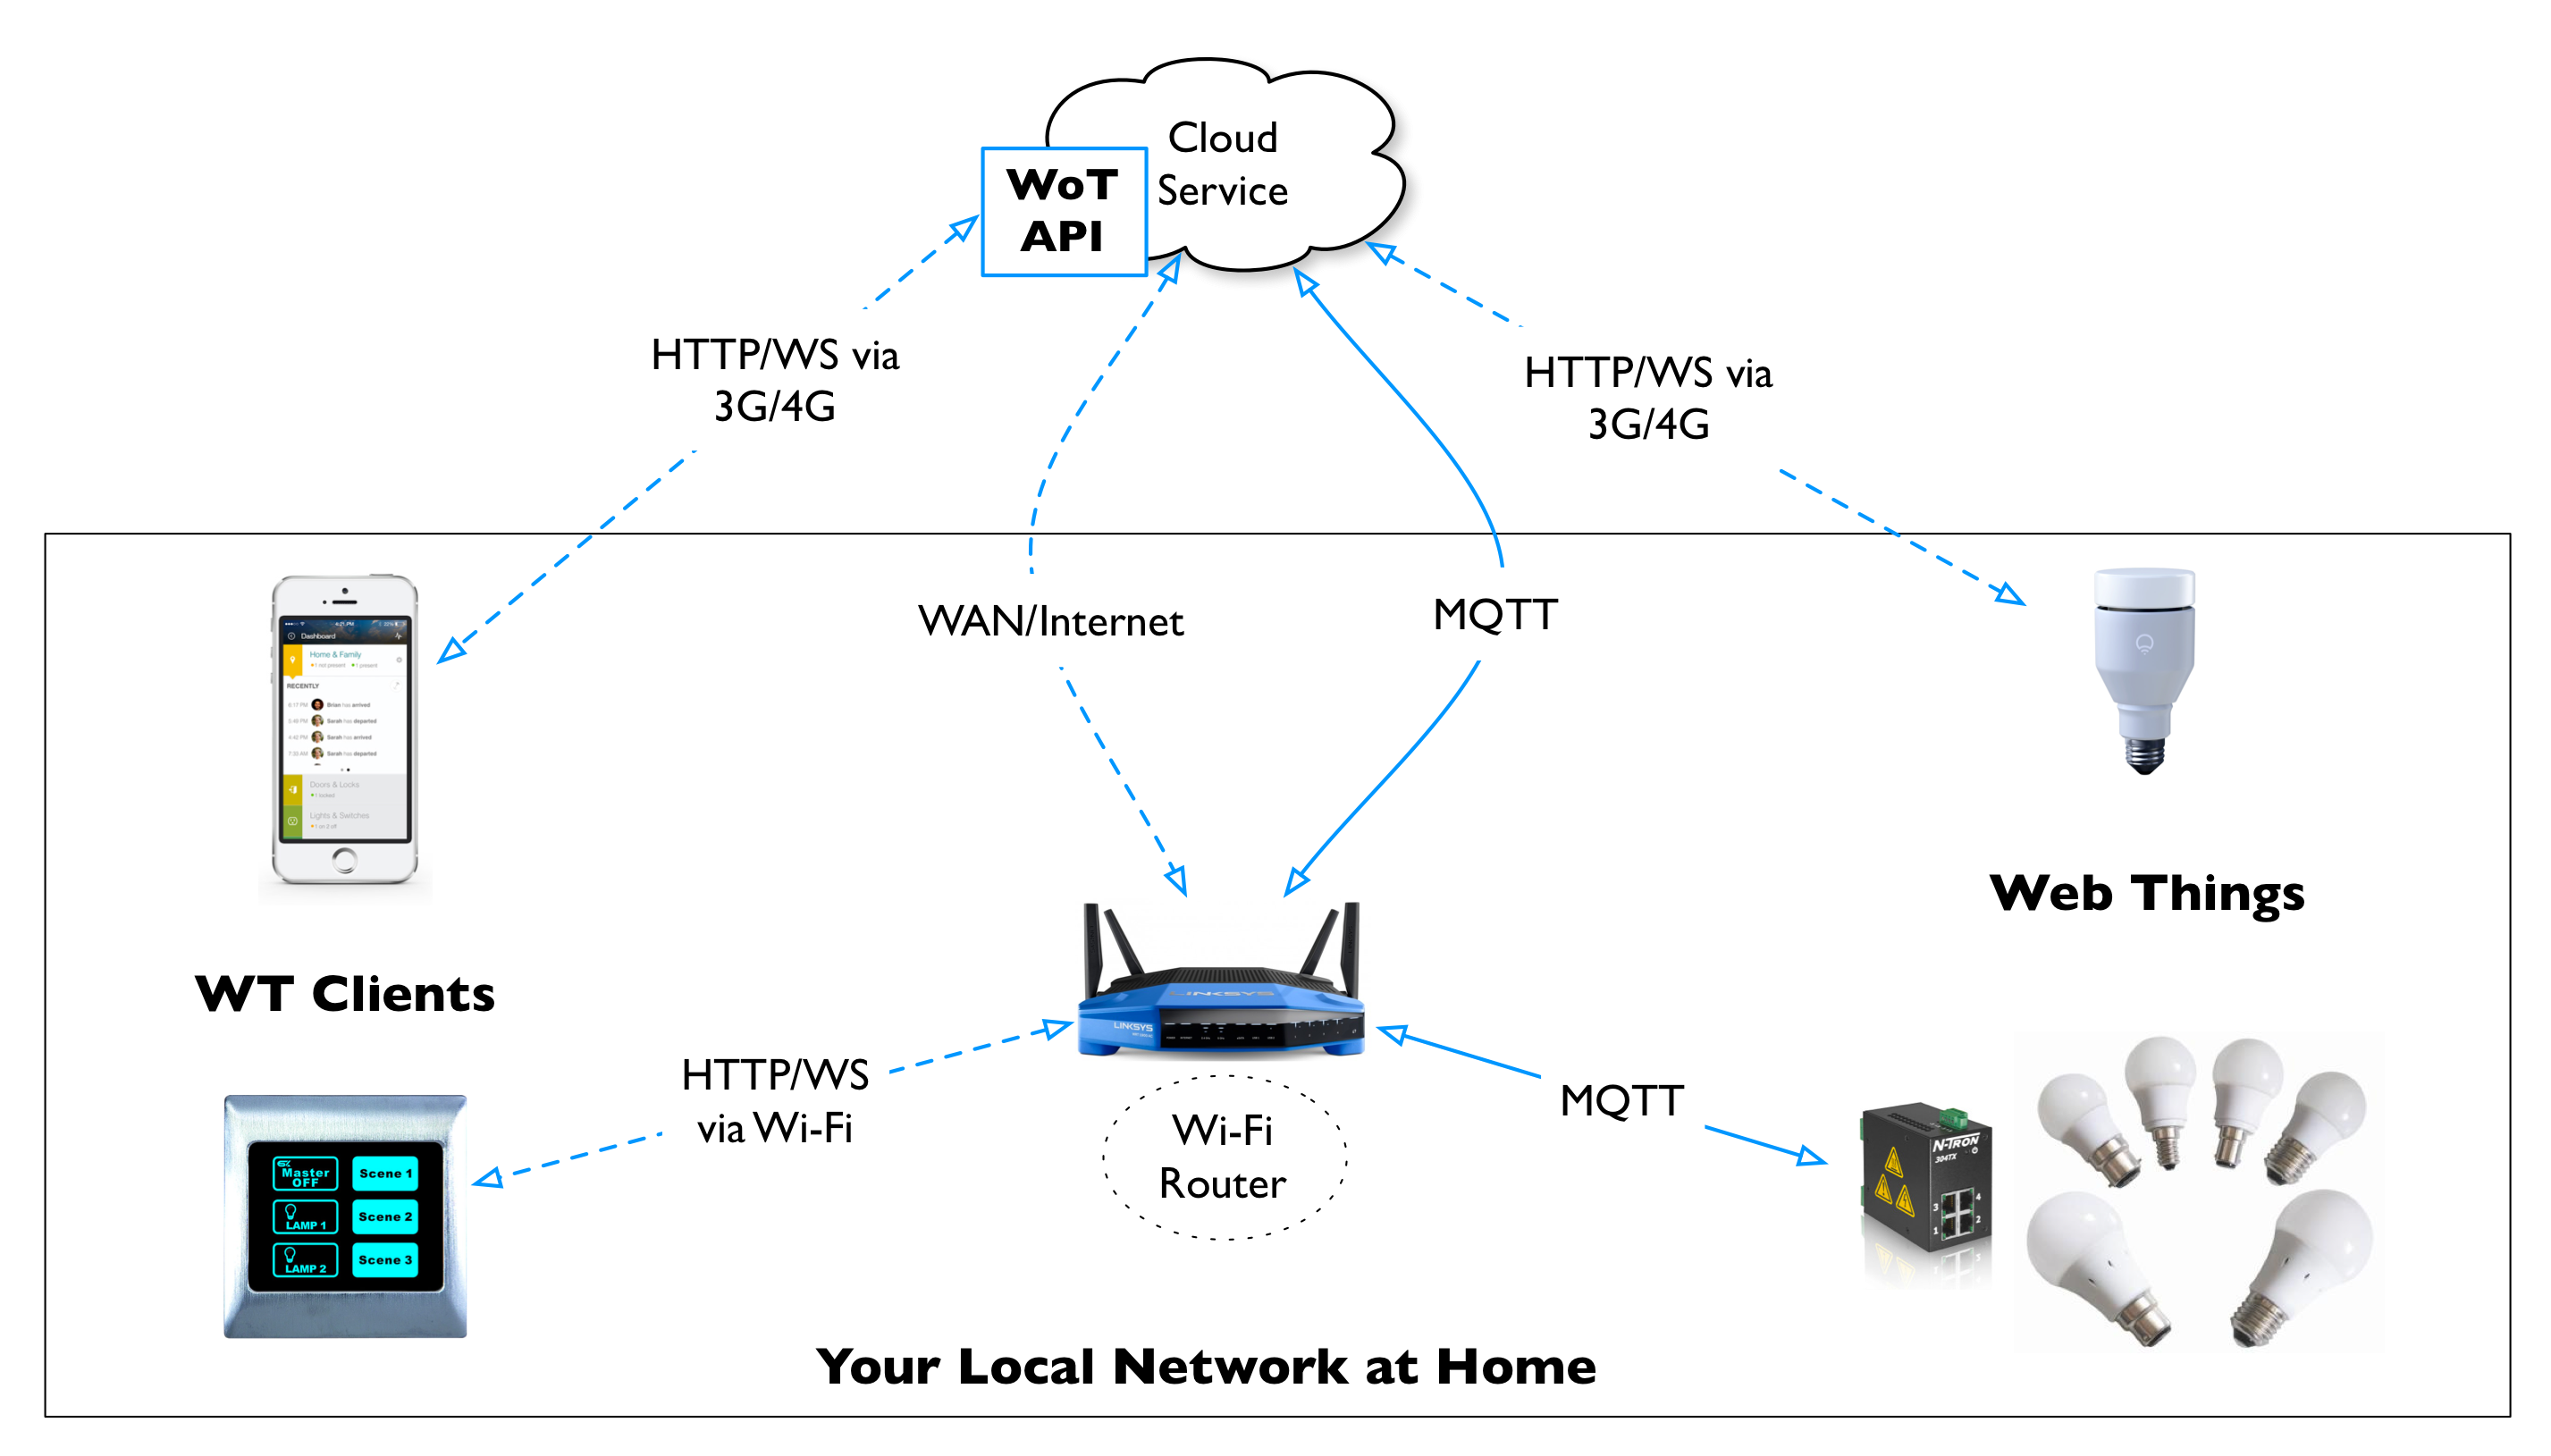 A cloud service may expose the Web API of a Web Thing for Clients to connect to it